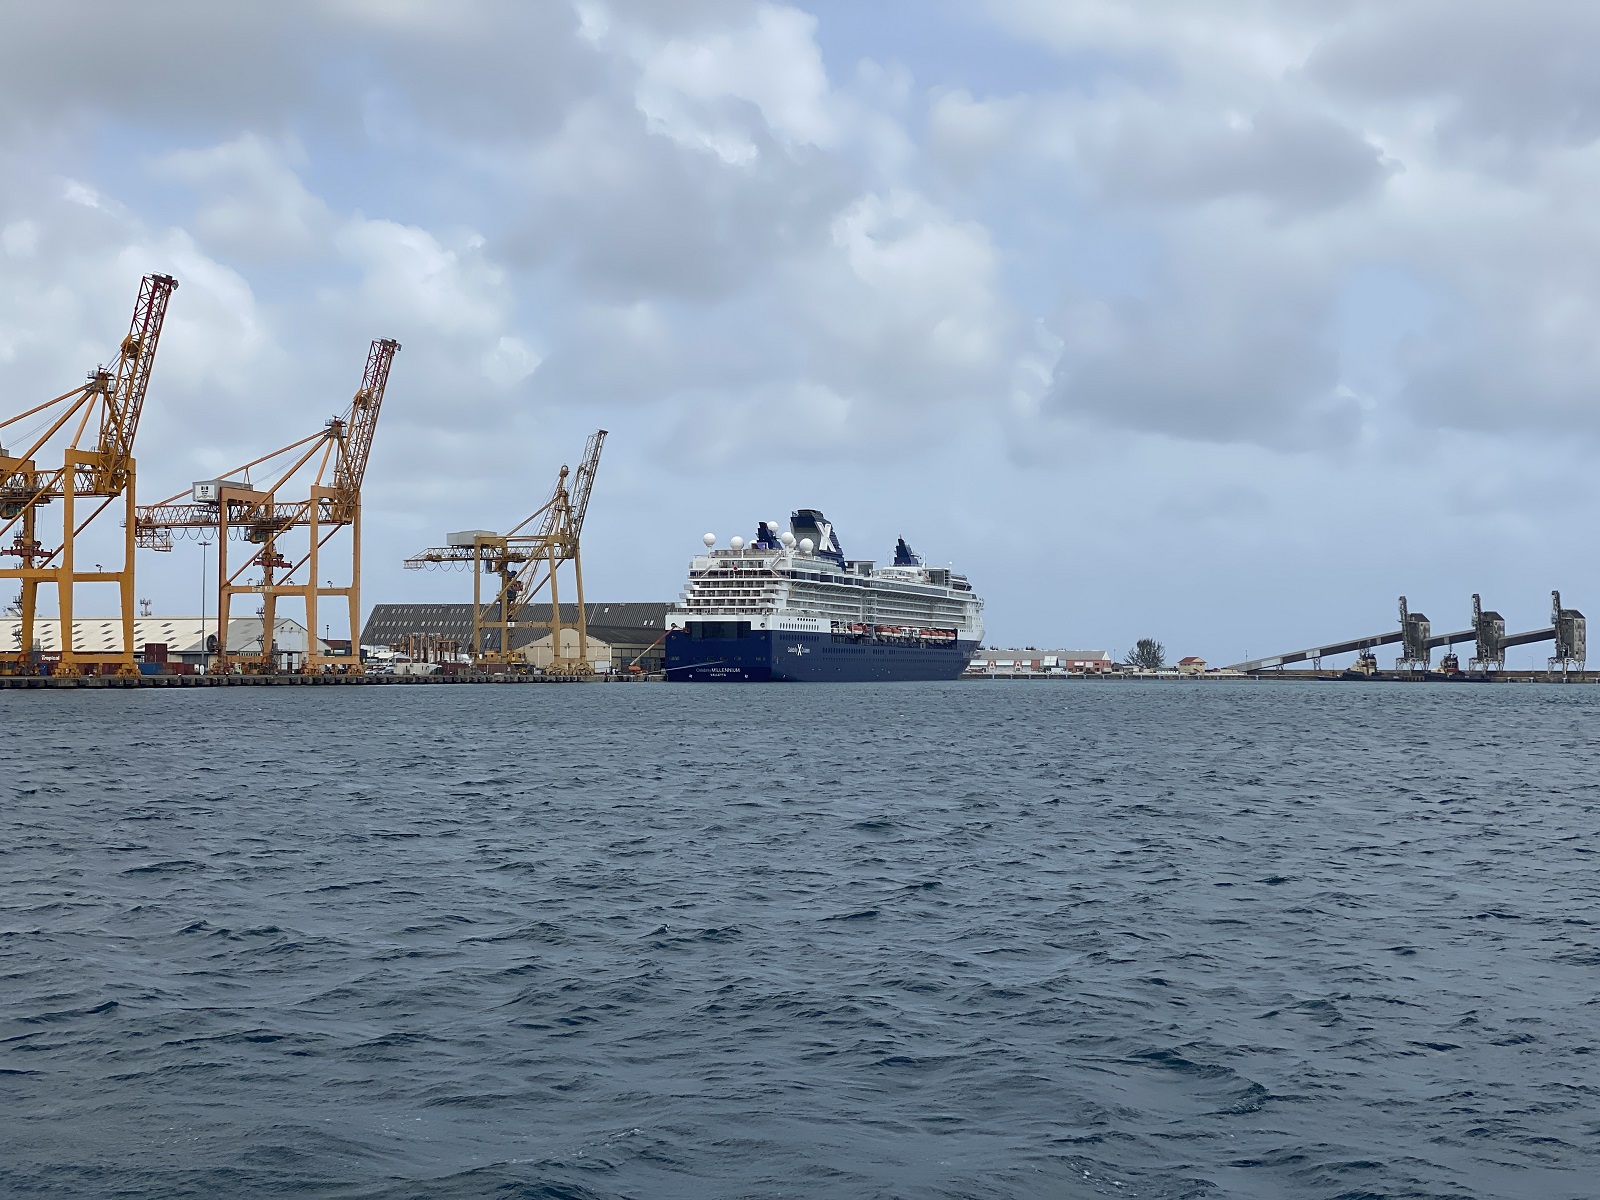 A rear shot of Celebrity Millennium docked in Barbados next to shipping cranes